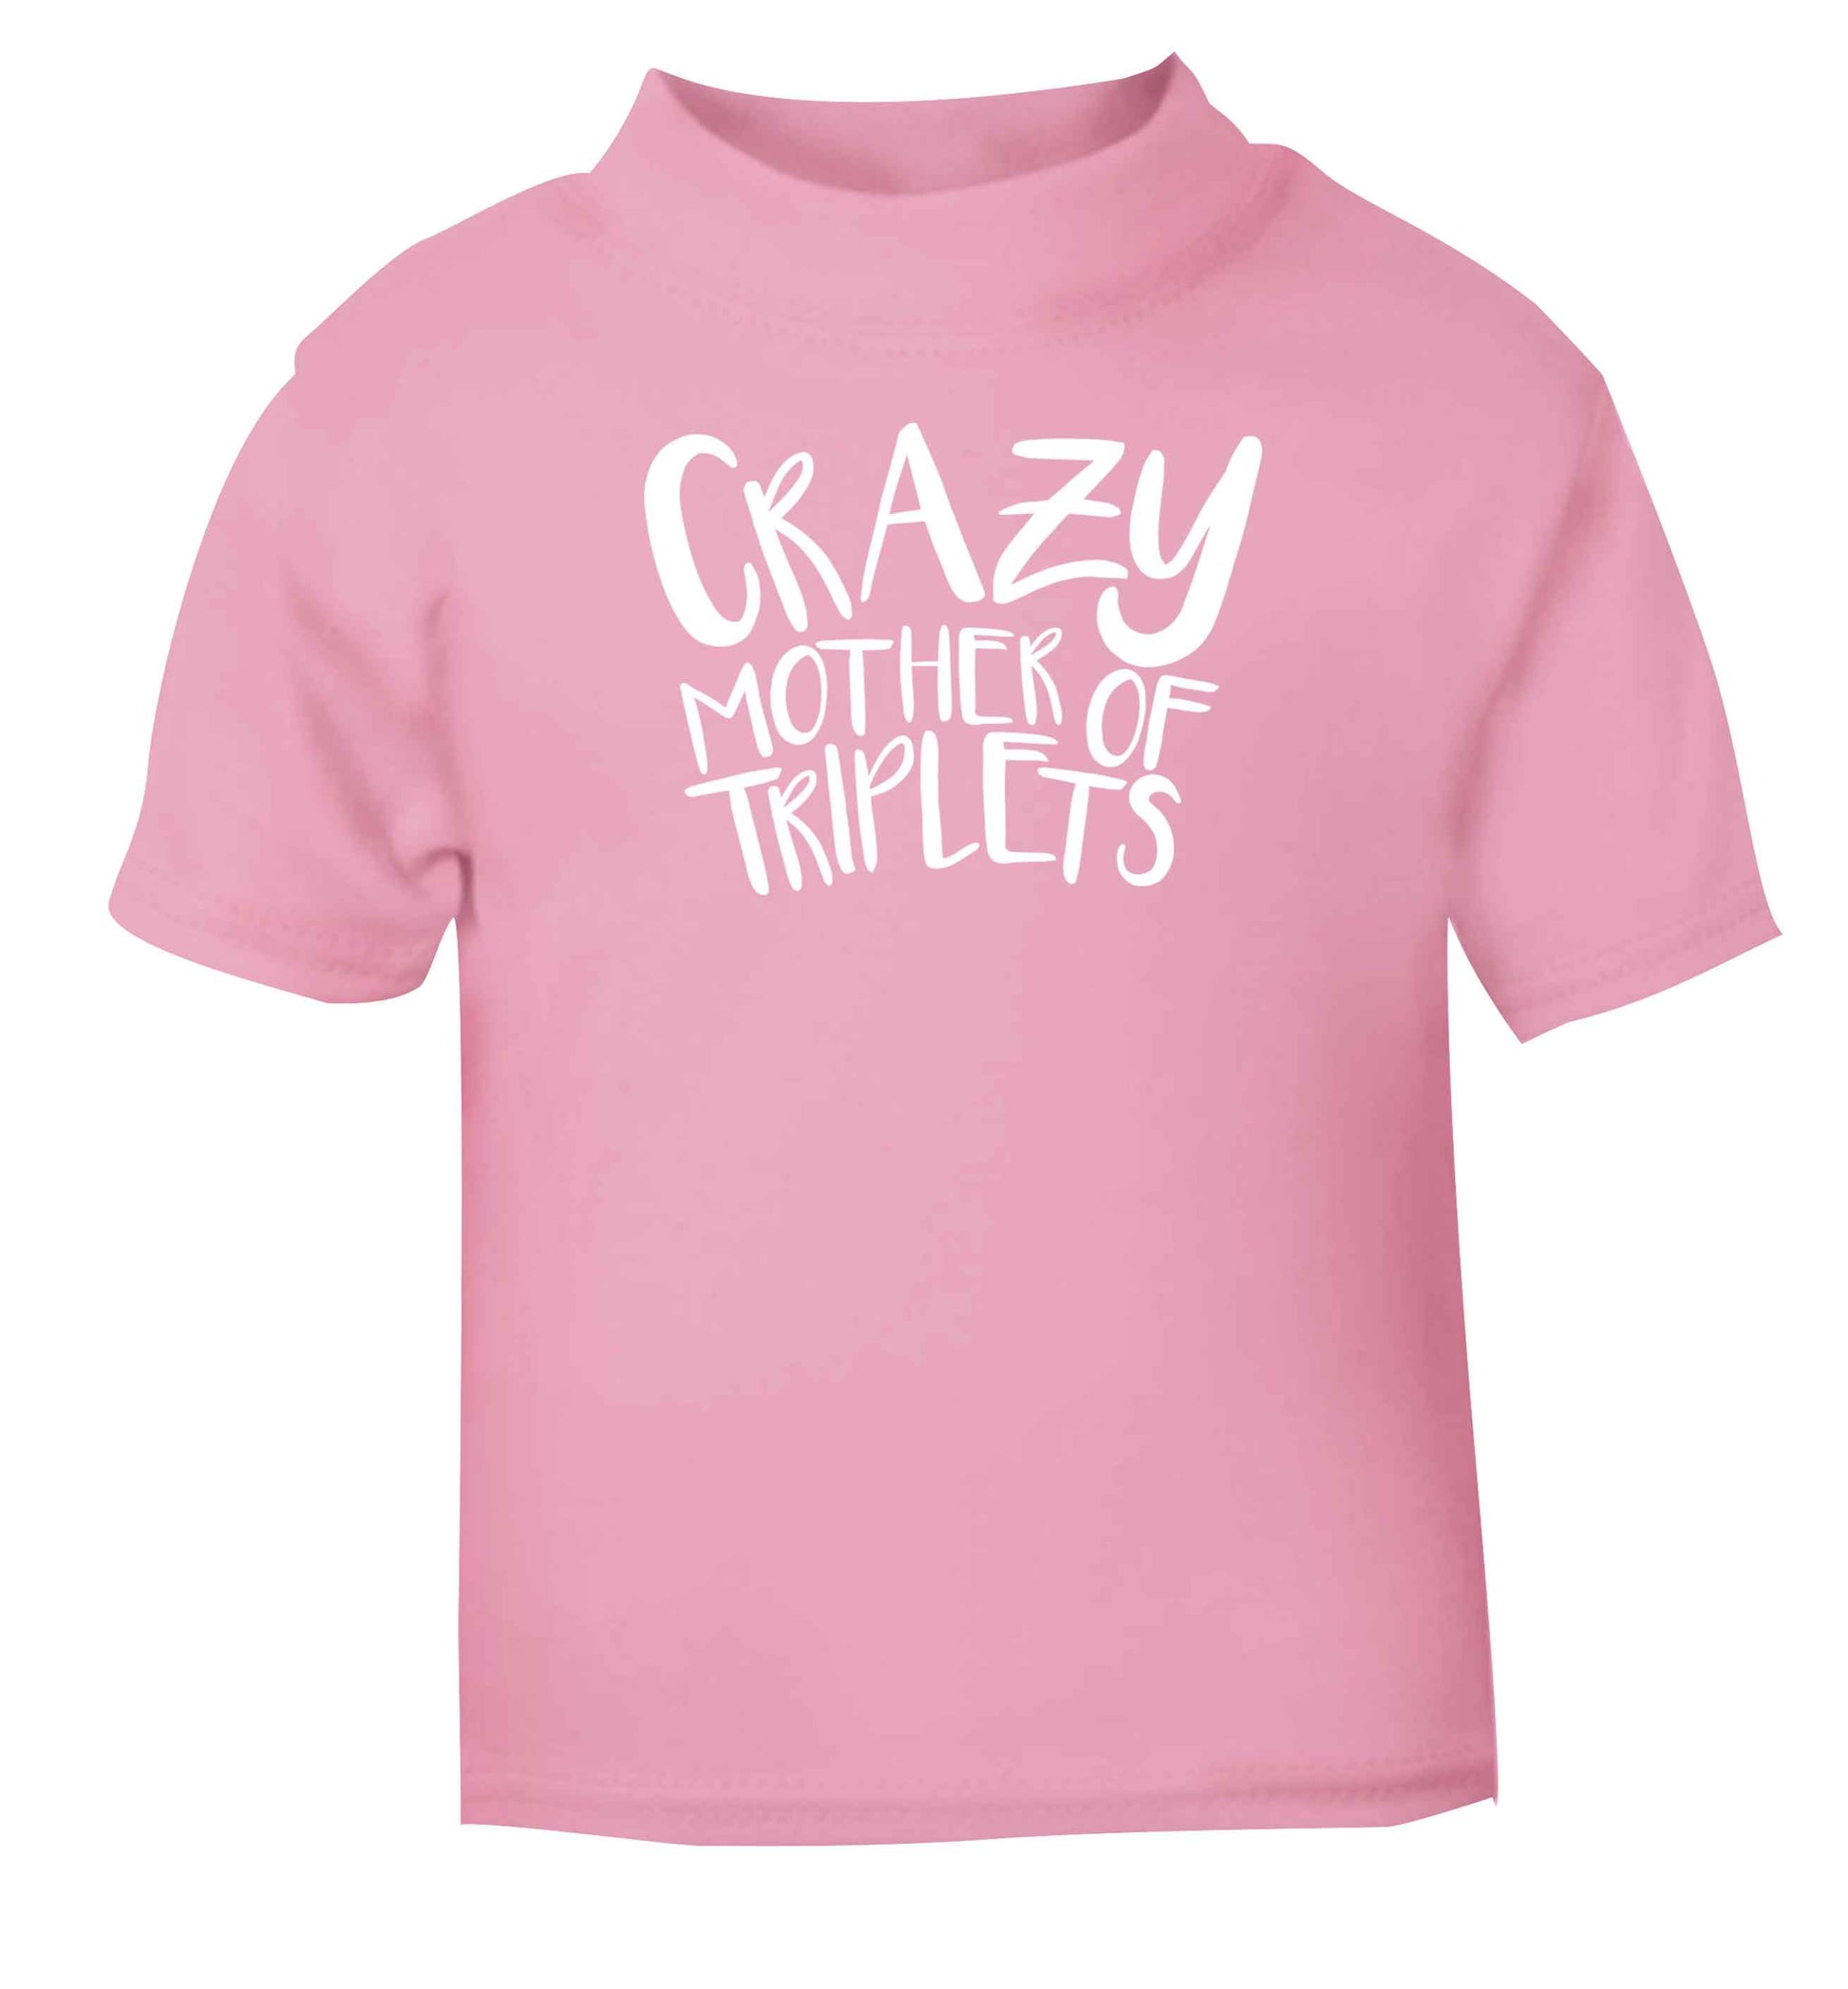 Crazy mother of triplets Children's light pink Tshirt 12-13 Years